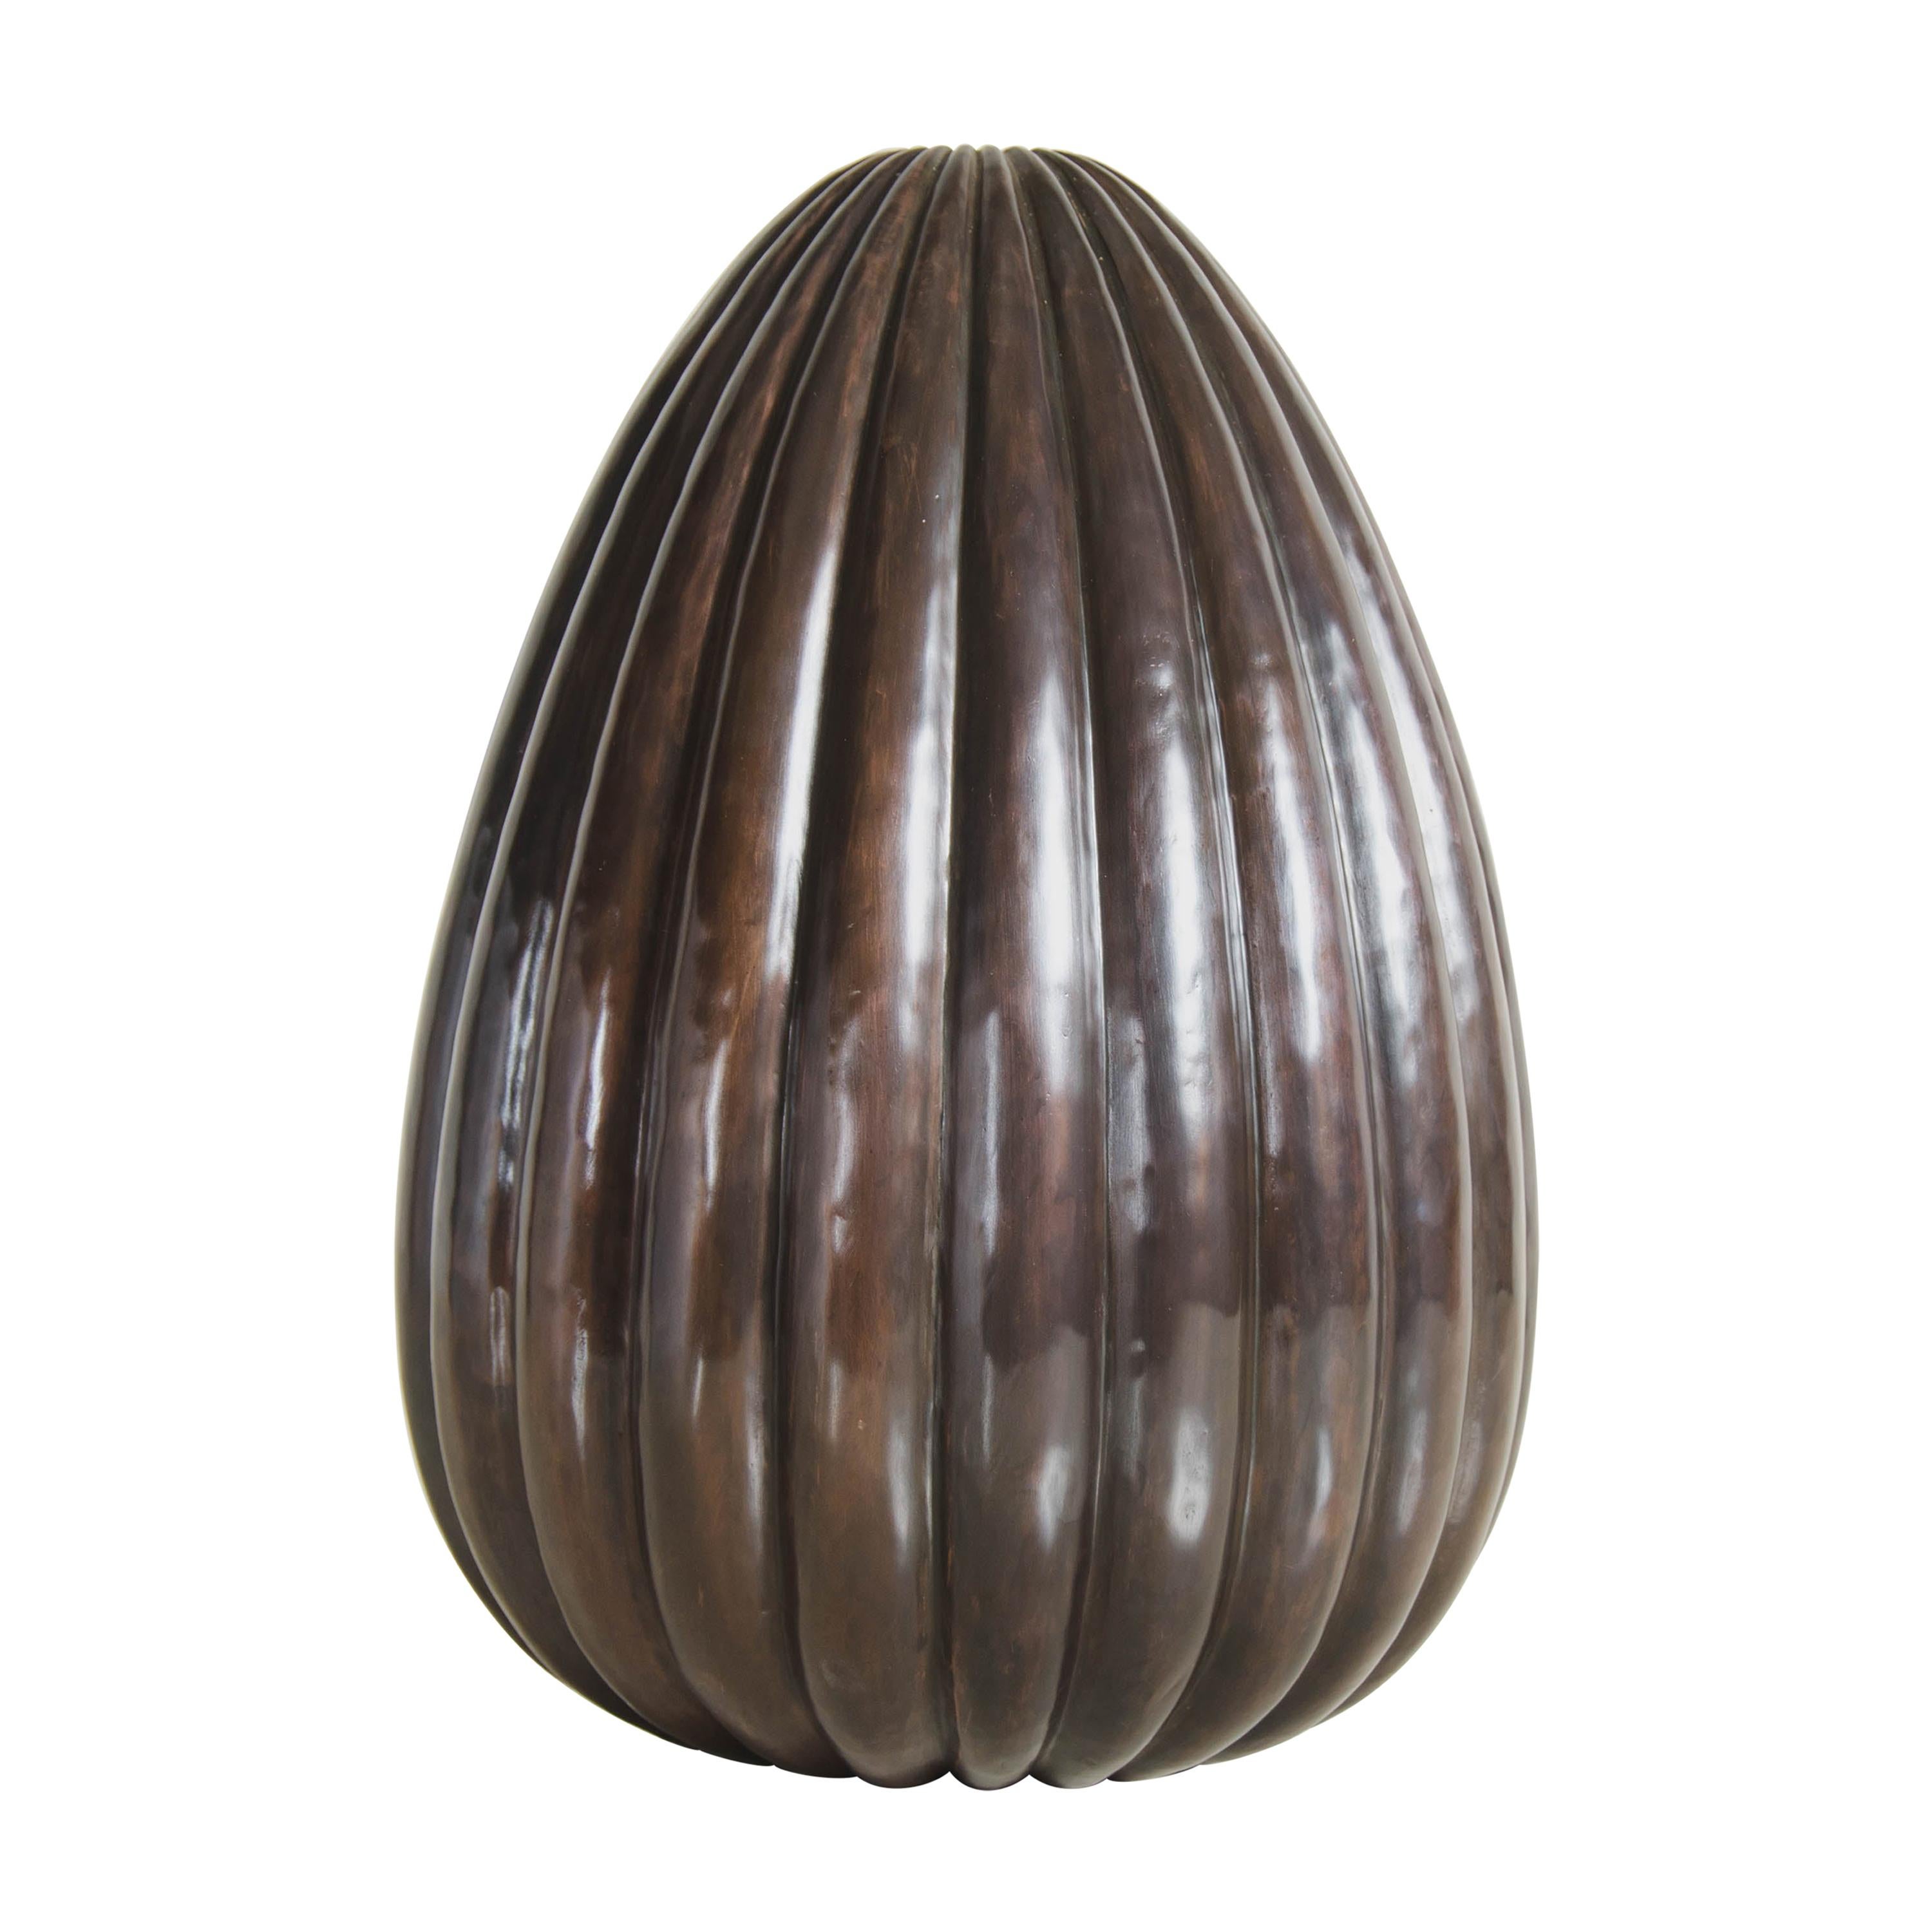 Lobed Vase in Antique Copper by Robert Kuo, Limited Edition For Sale